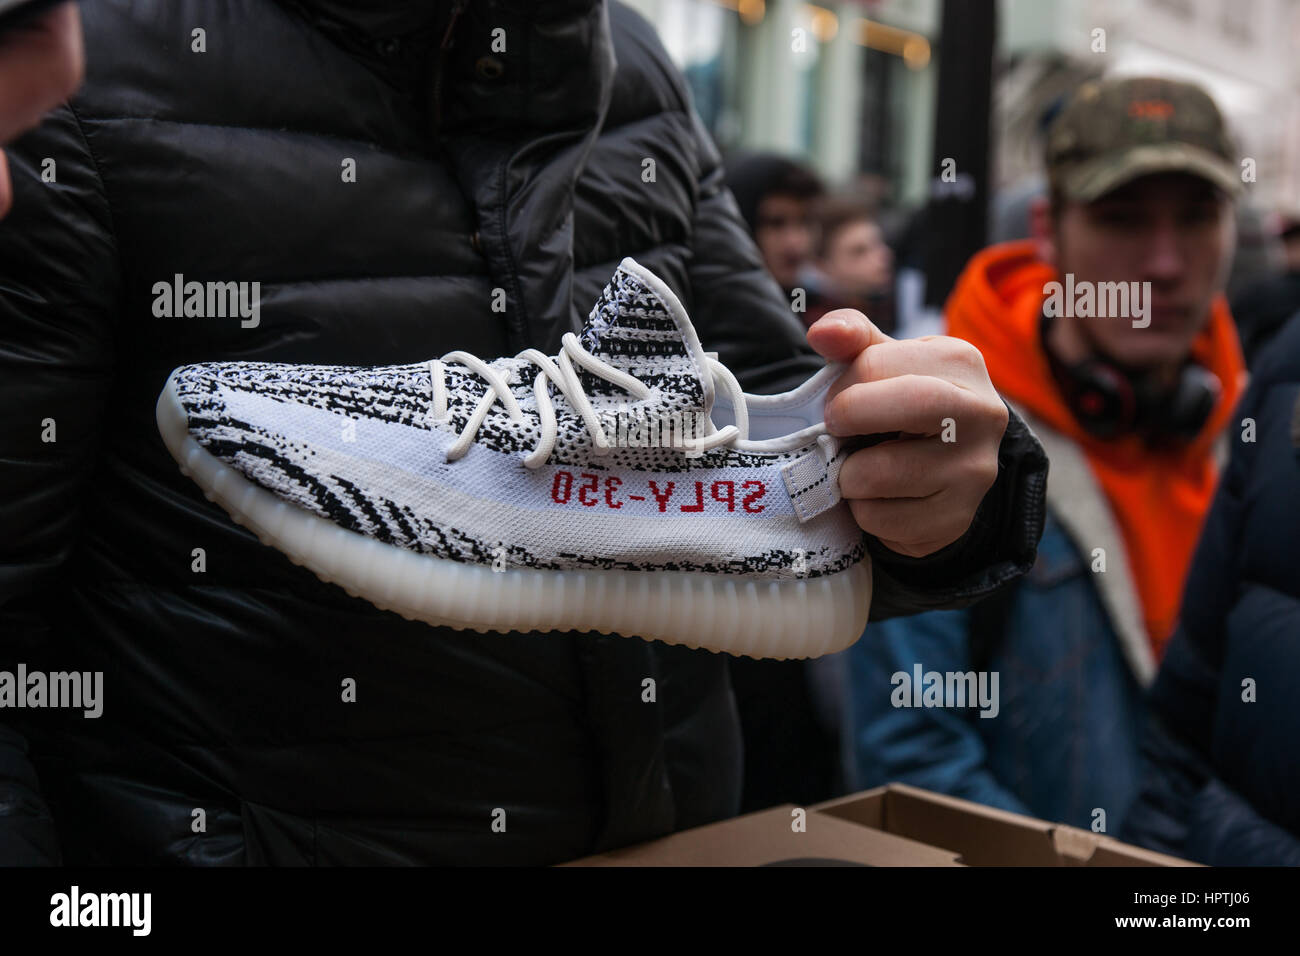 yeezy boost 350 25th february